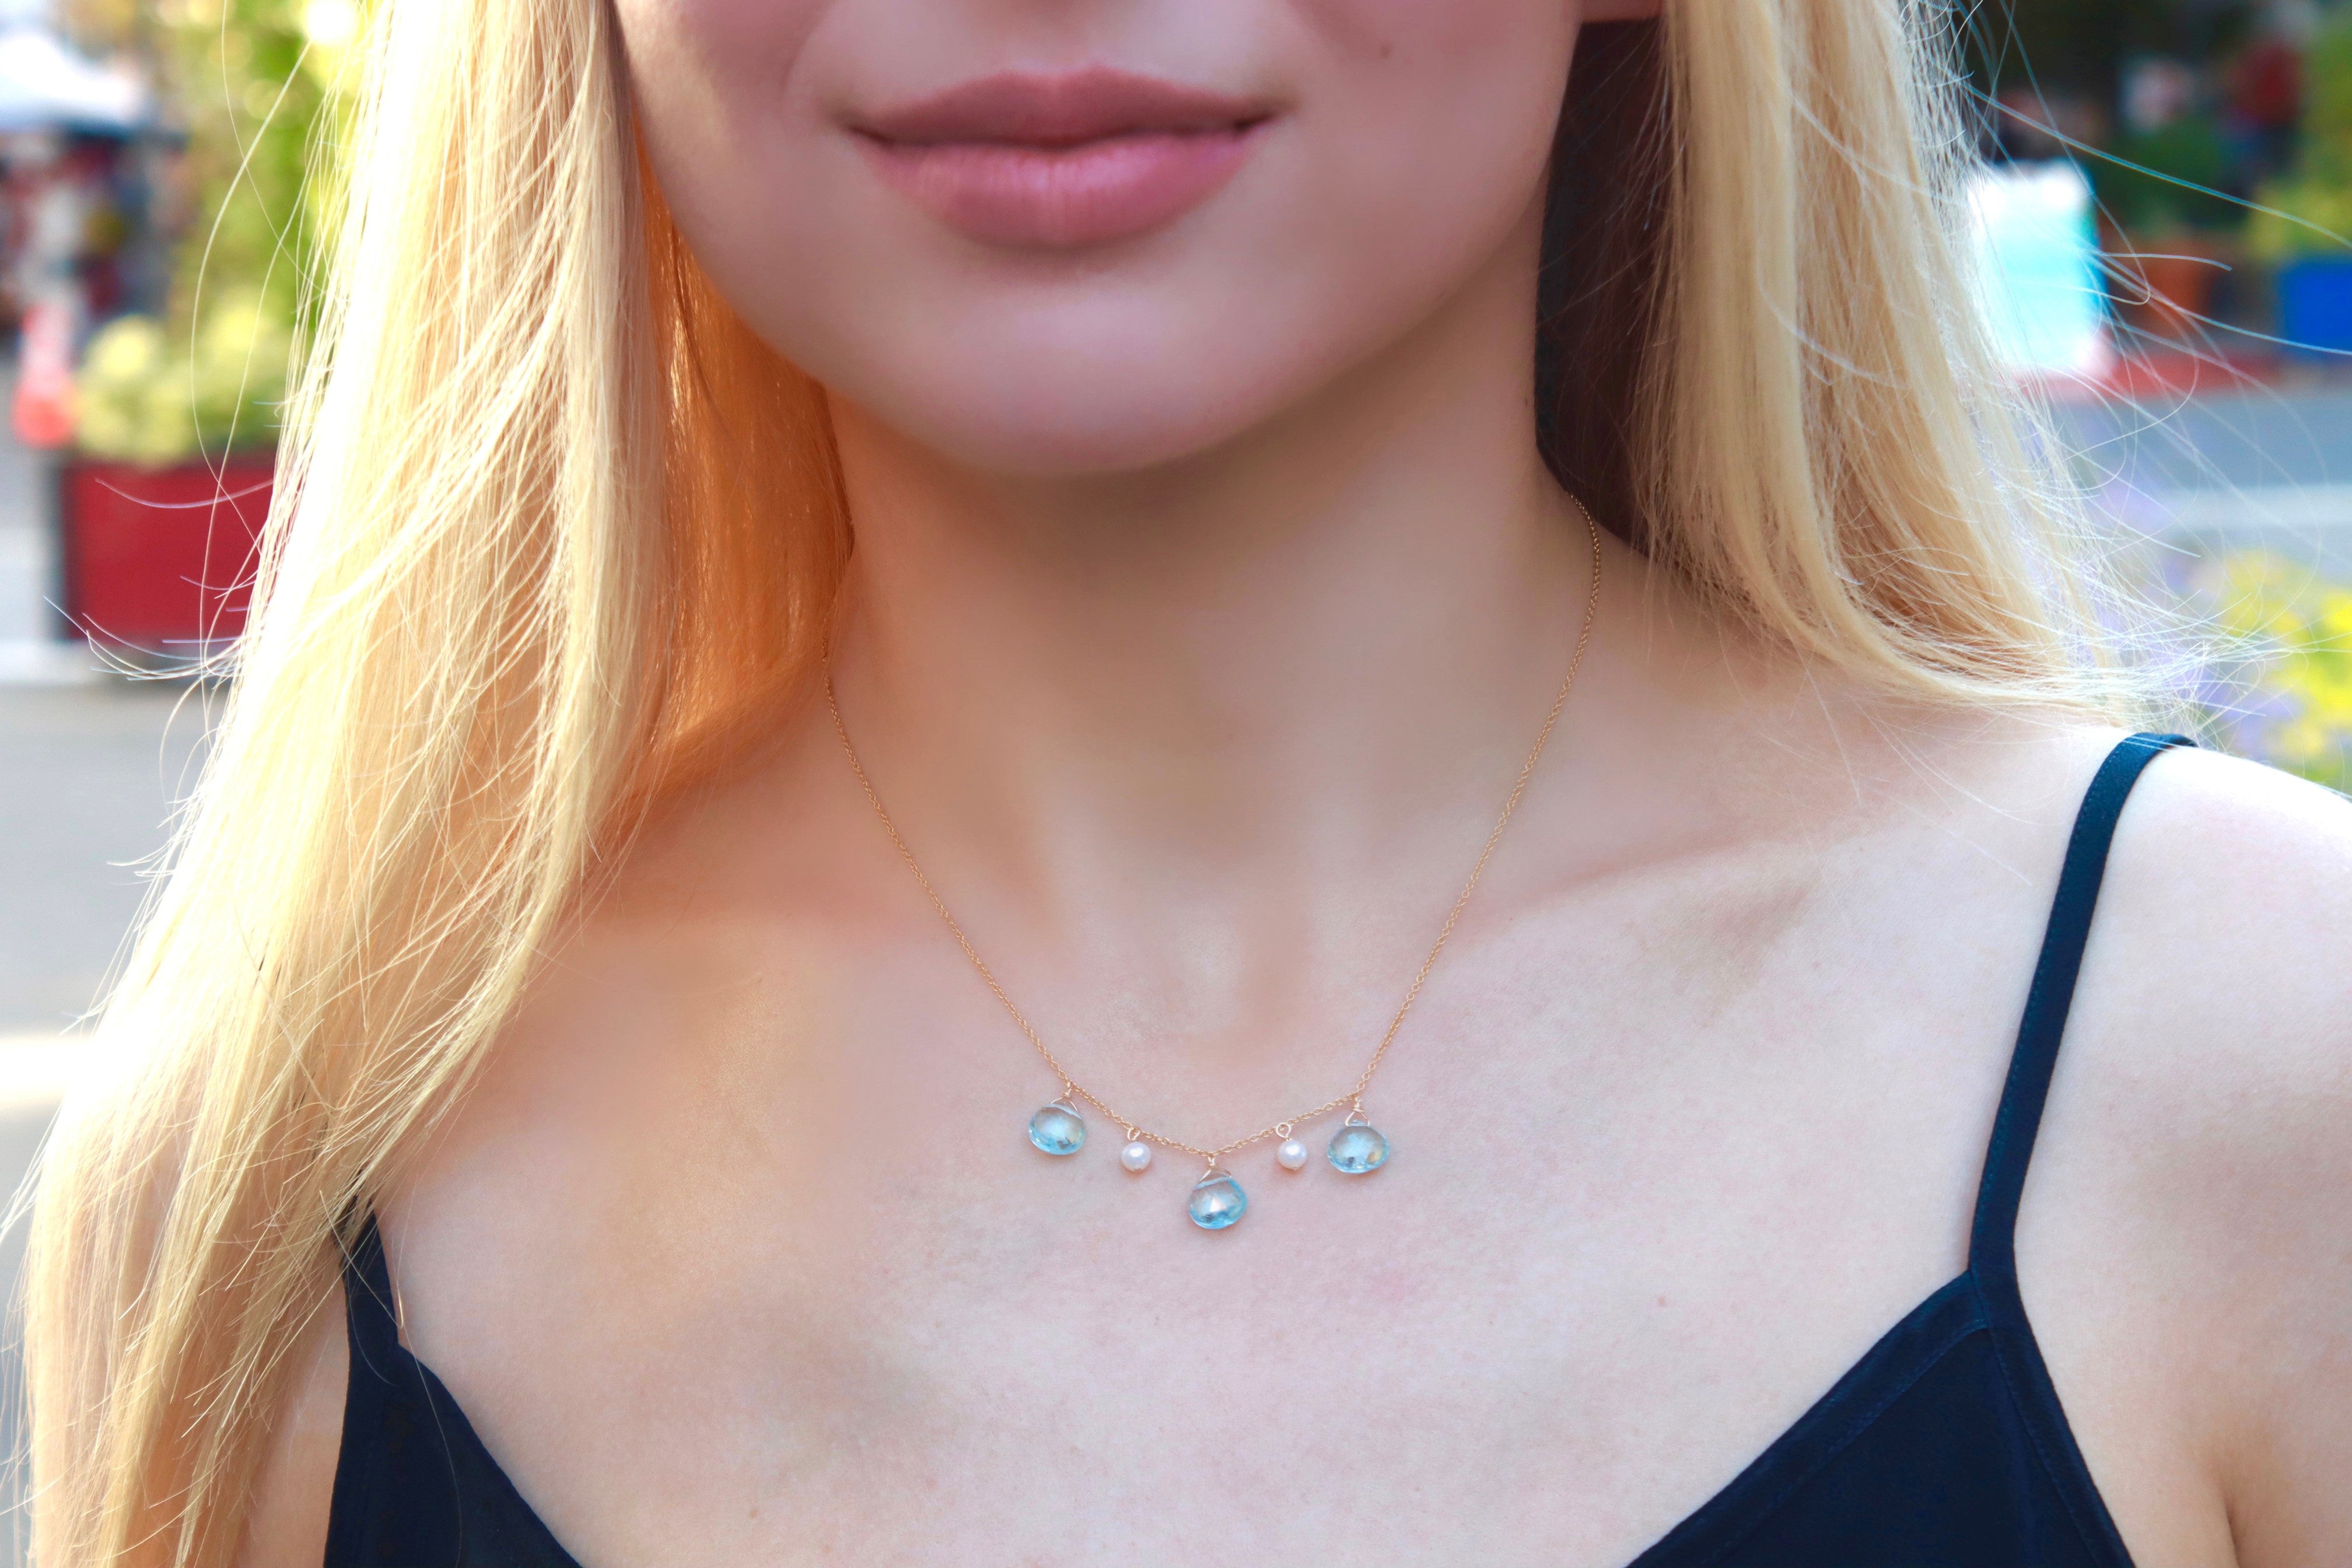 Blue topaz briolette and pearl necklace